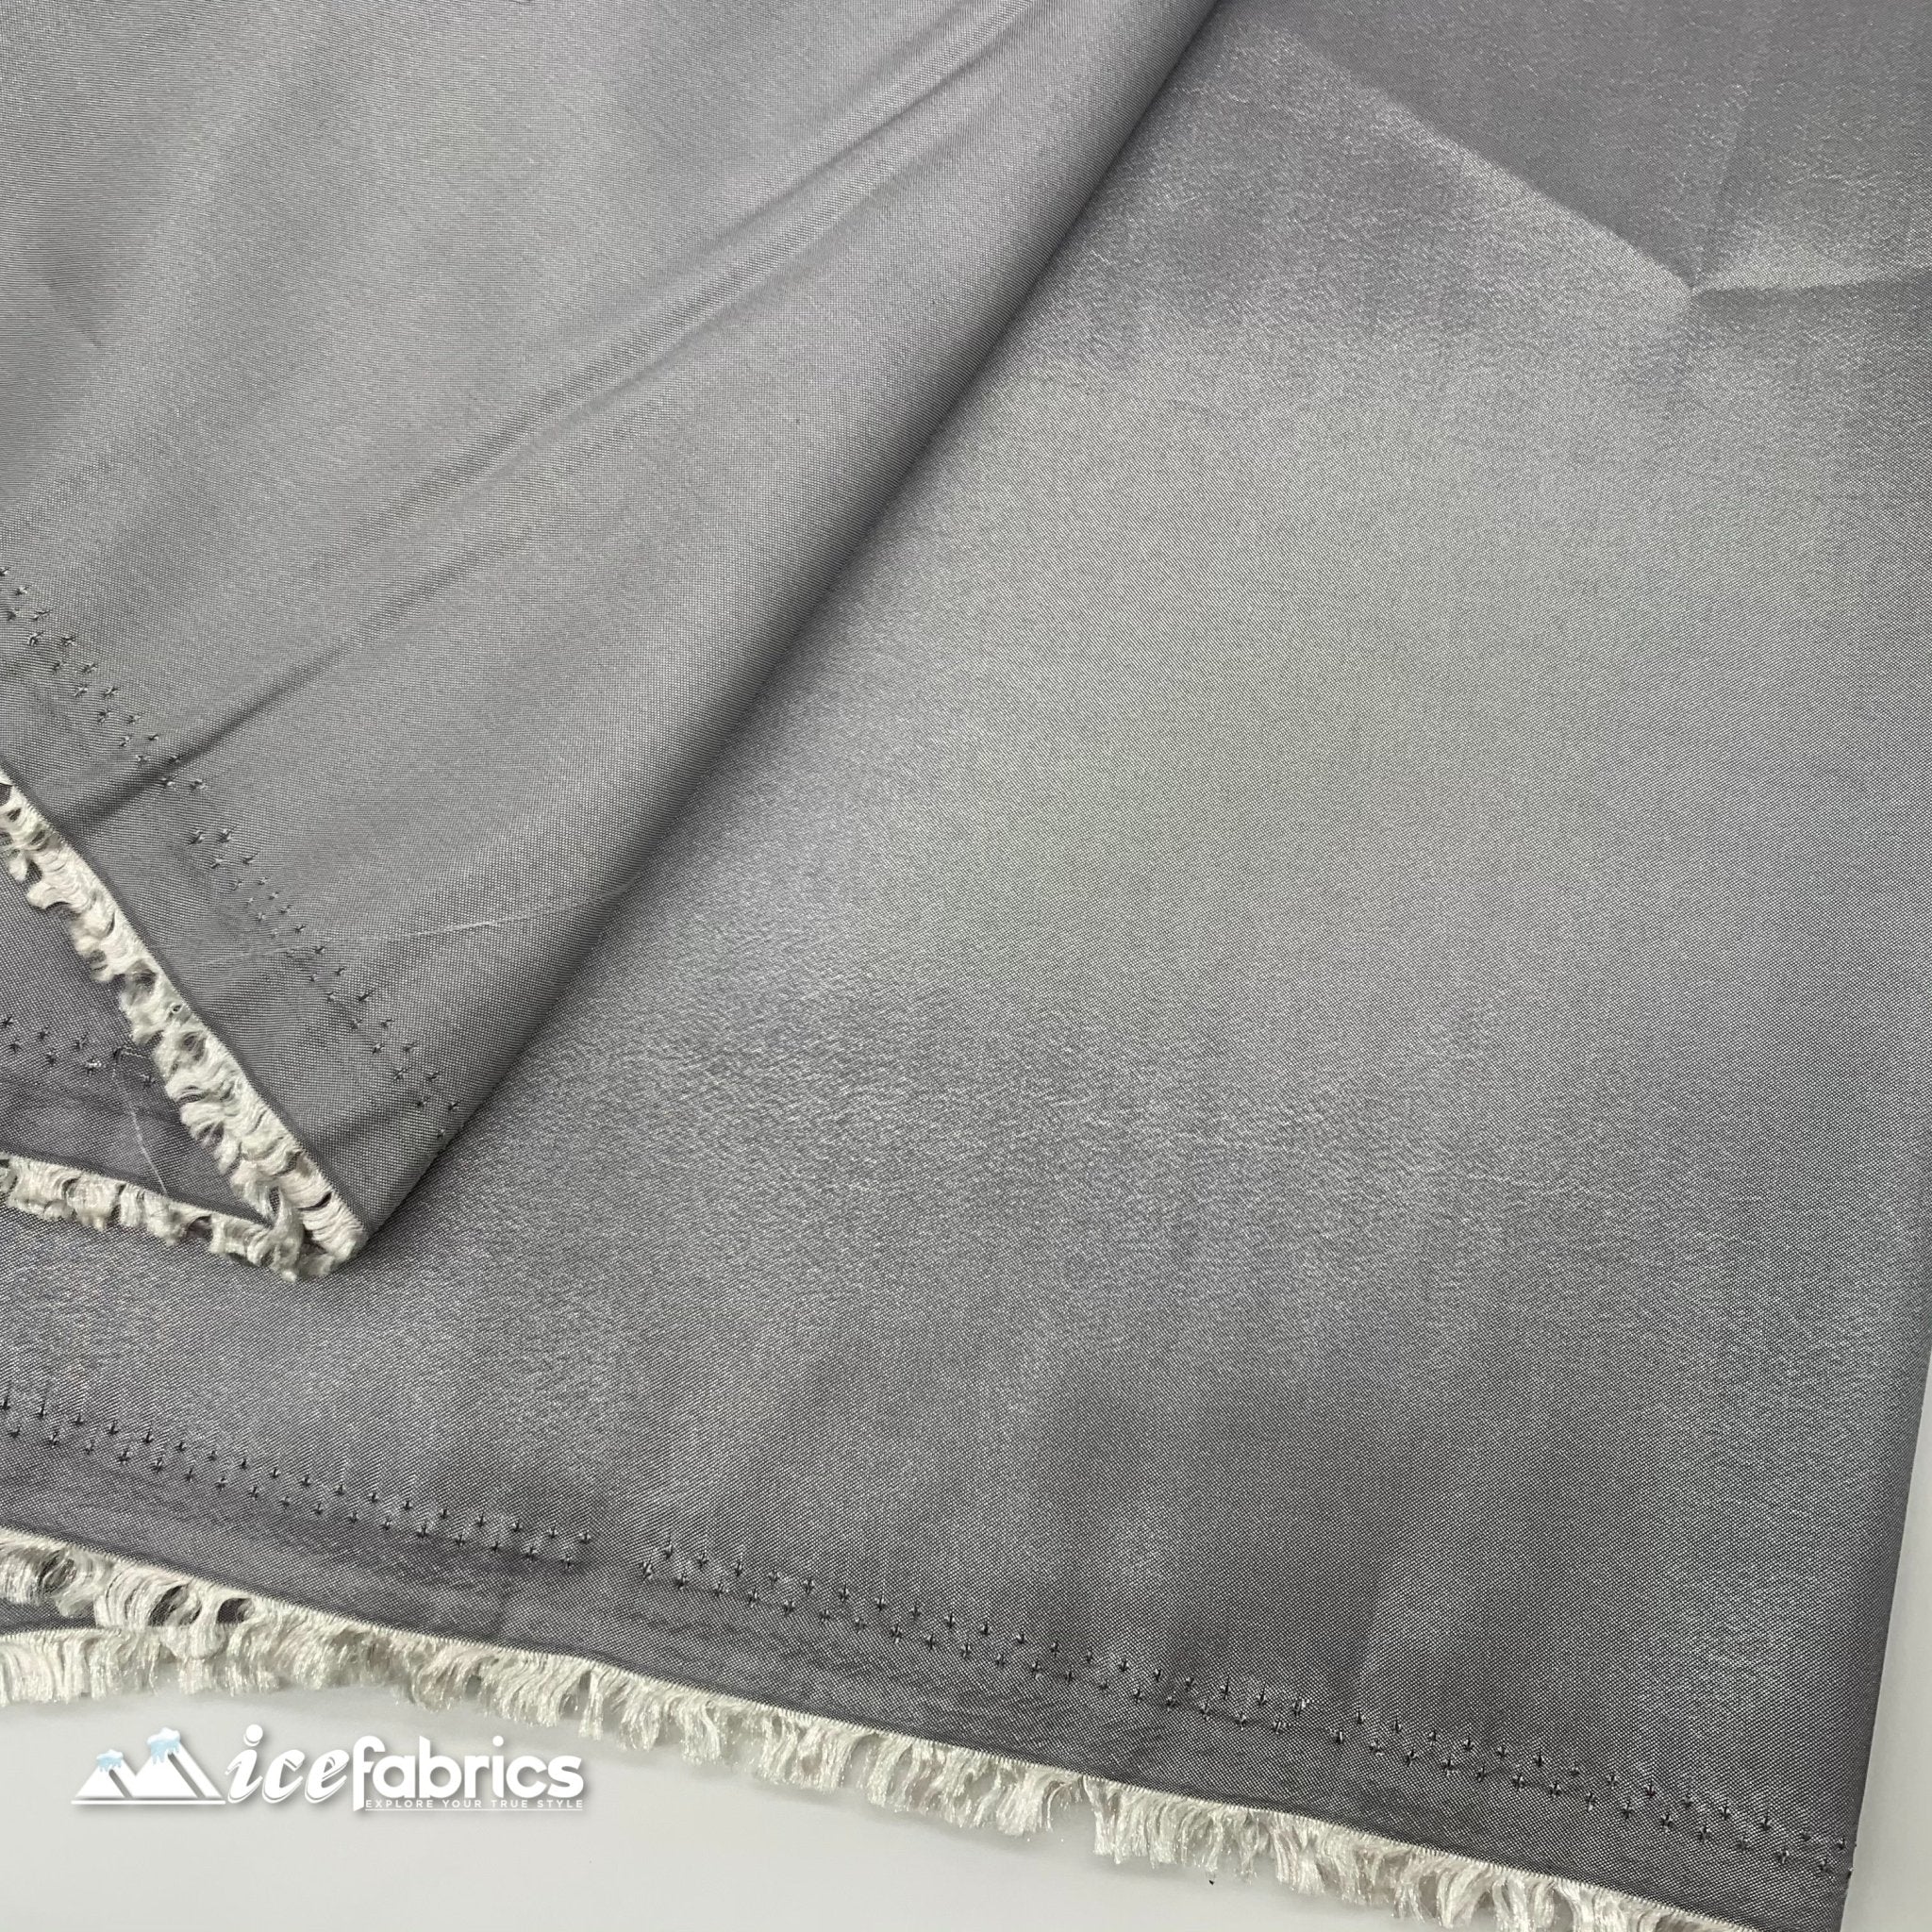 High Quality Solid Taffeta Fabric_ 60" Width_ By The YardTaffeta FabricICEFABRICICE FABRICSKelly GreenHigh Quality Solid Taffeta Fabric_ 60" Width_ By The YardTaffeta FabricICEFABRICICE FABRICSGrayHigh Quality Solid Taffeta Fabric_ 60" Width_ By The Yard ICEFABRIC Gray